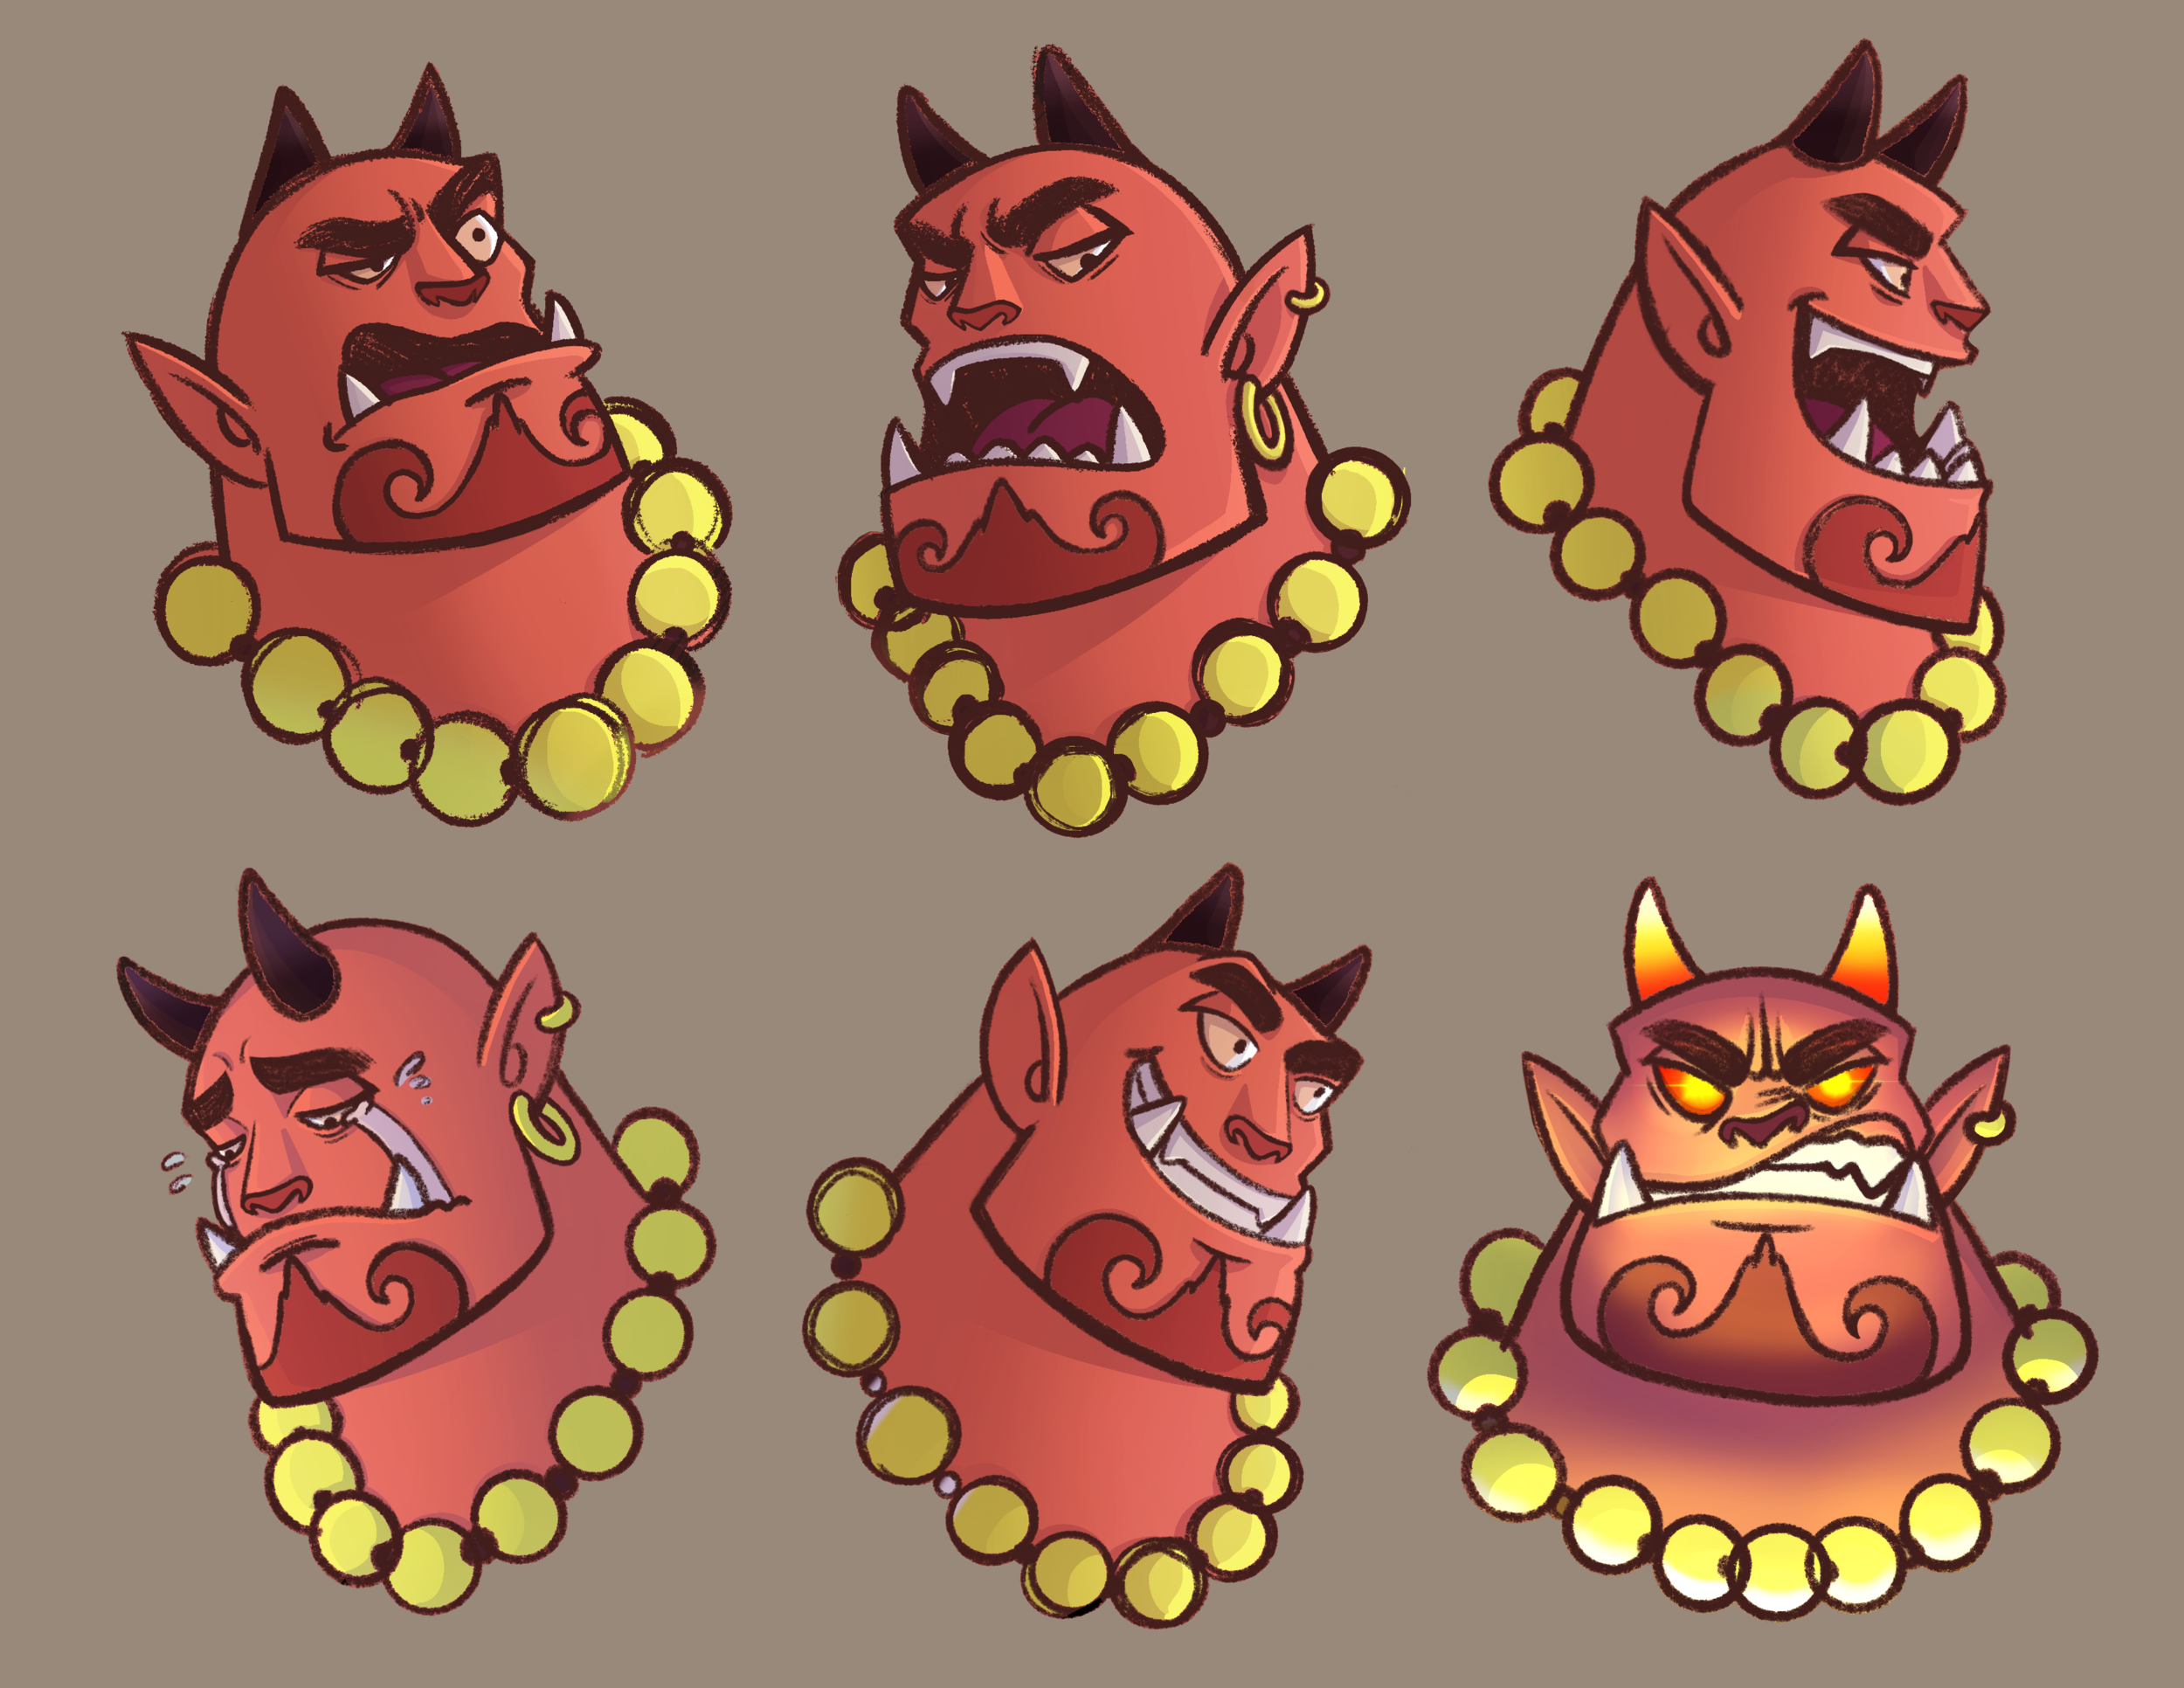 Demon_face_expression.png